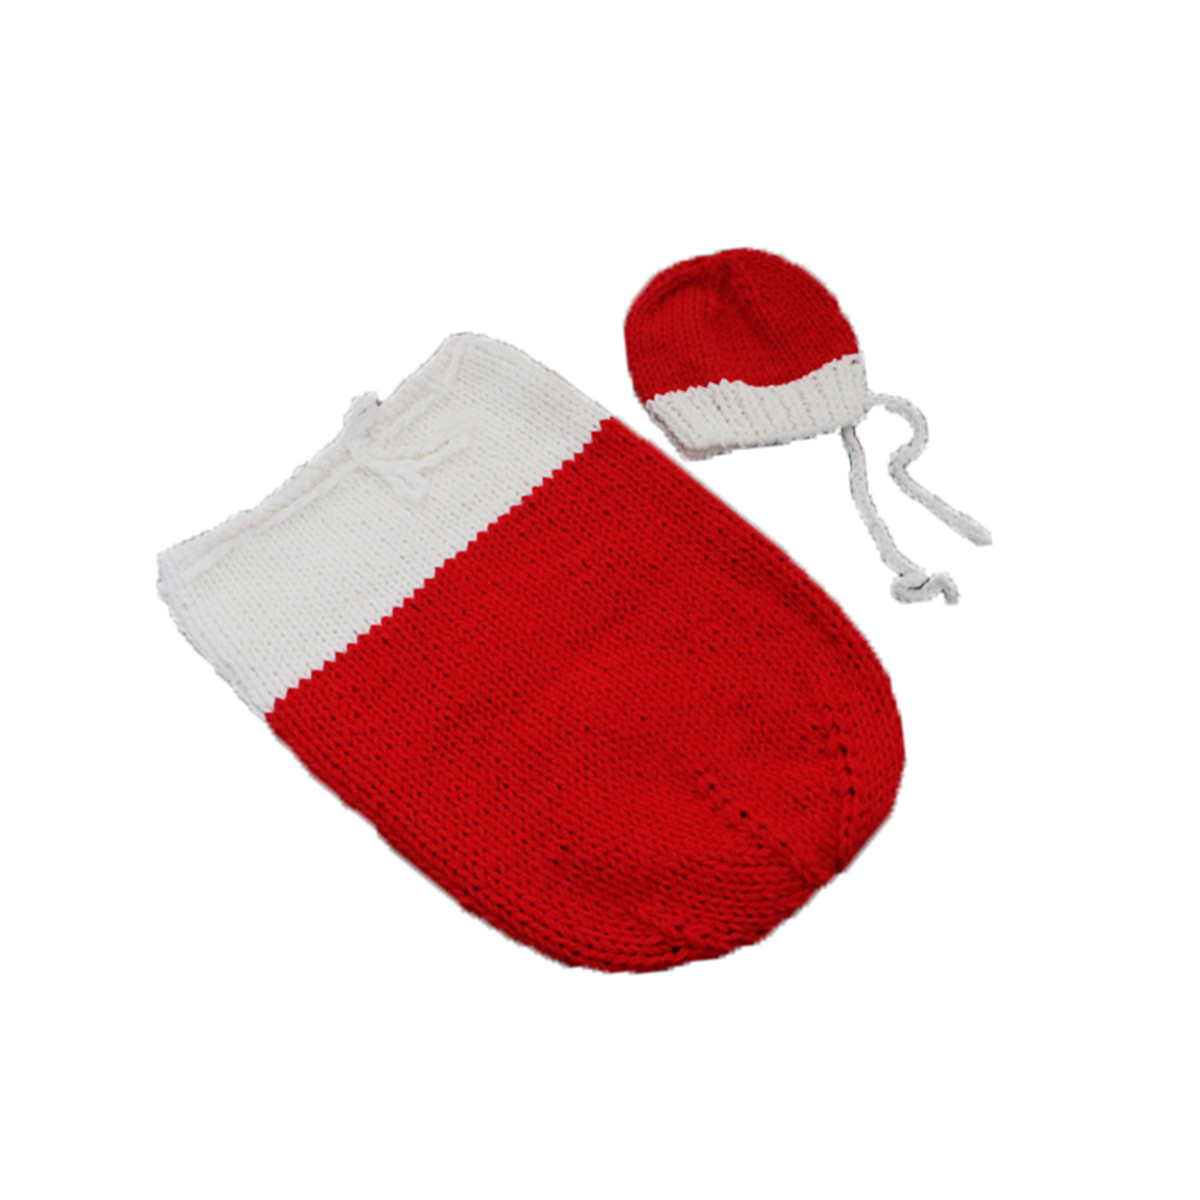 Baby Xmas Christmas Snowman Crochet Beanie Hat Knitted Photo Photography Prop x1 